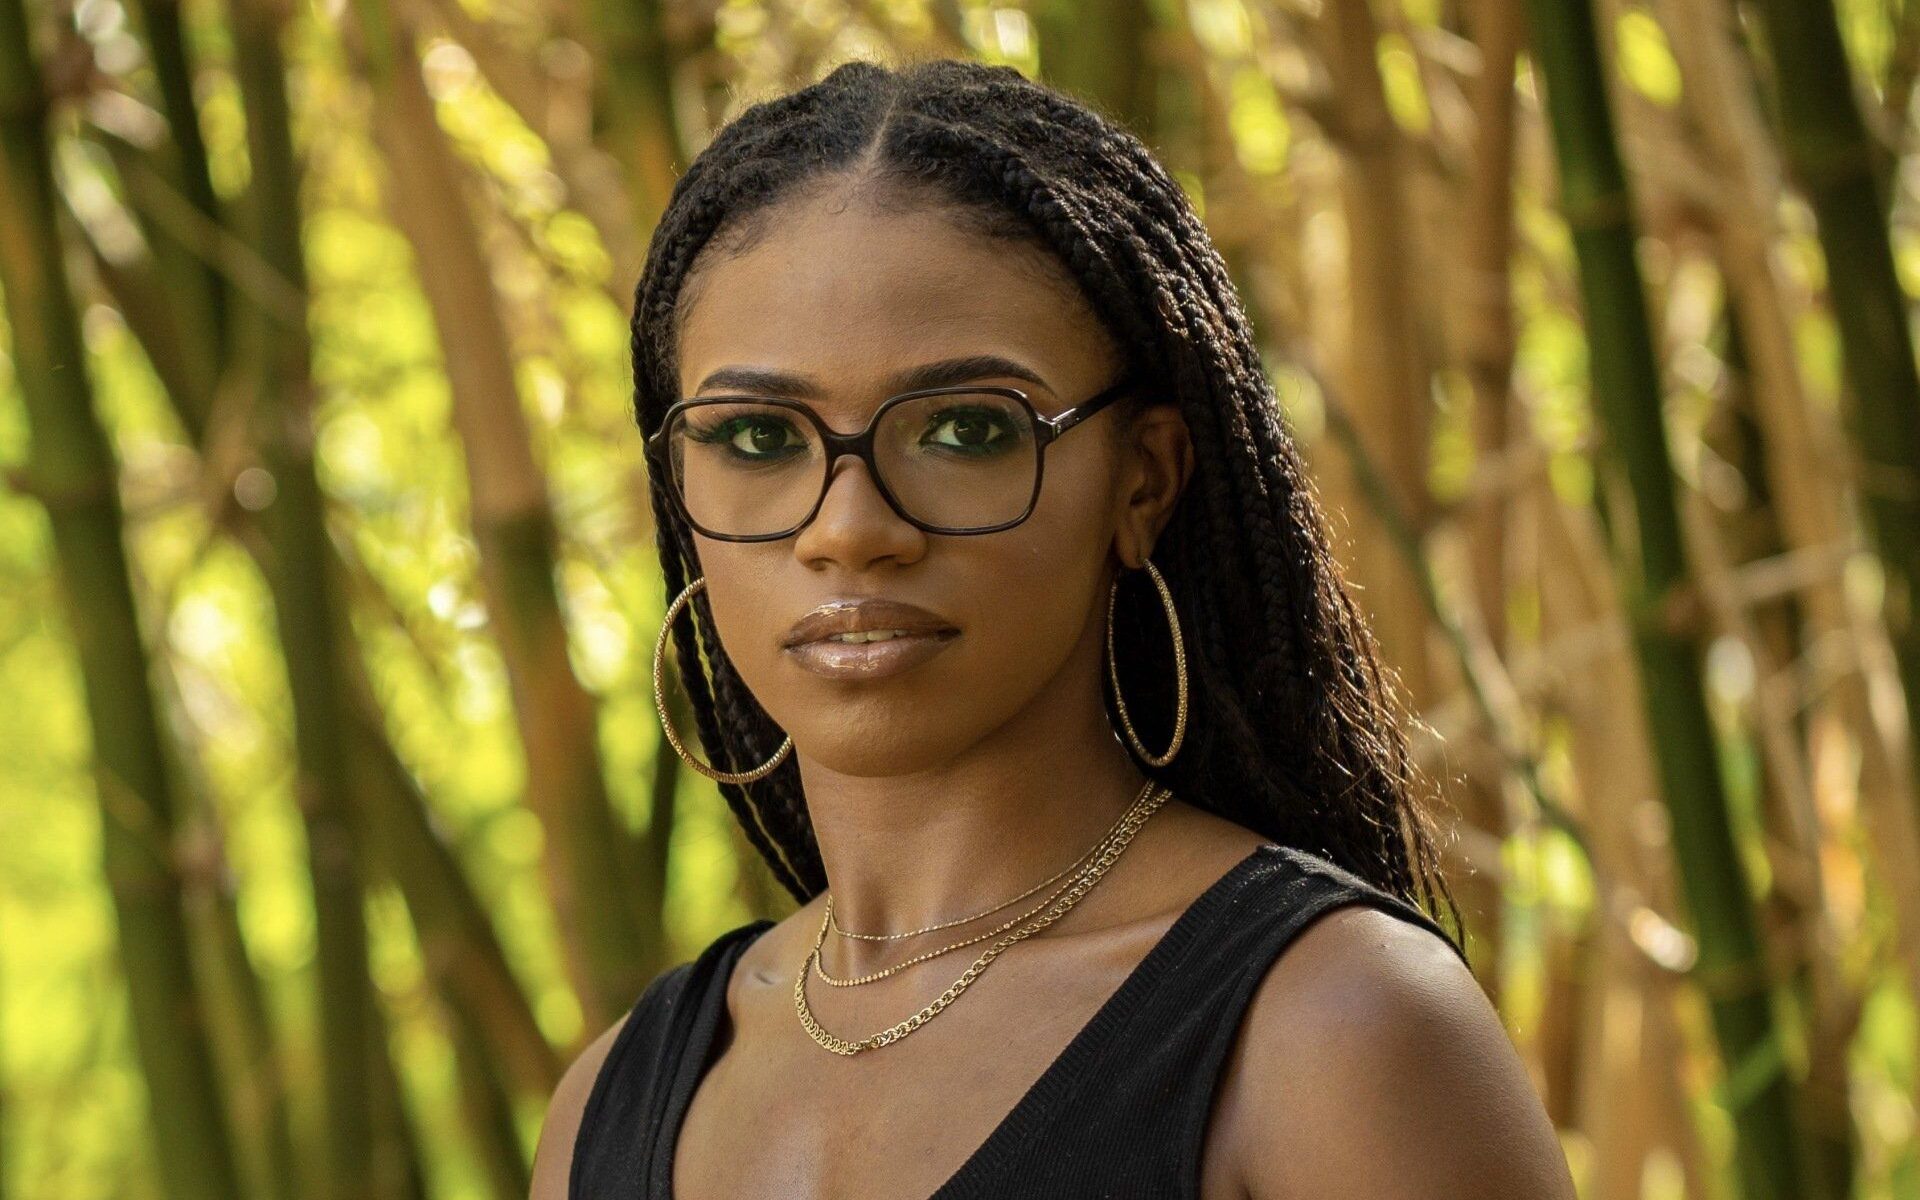 An interview with Arielle V. King (VLS '21) and founder of Intersectional Environmentalism